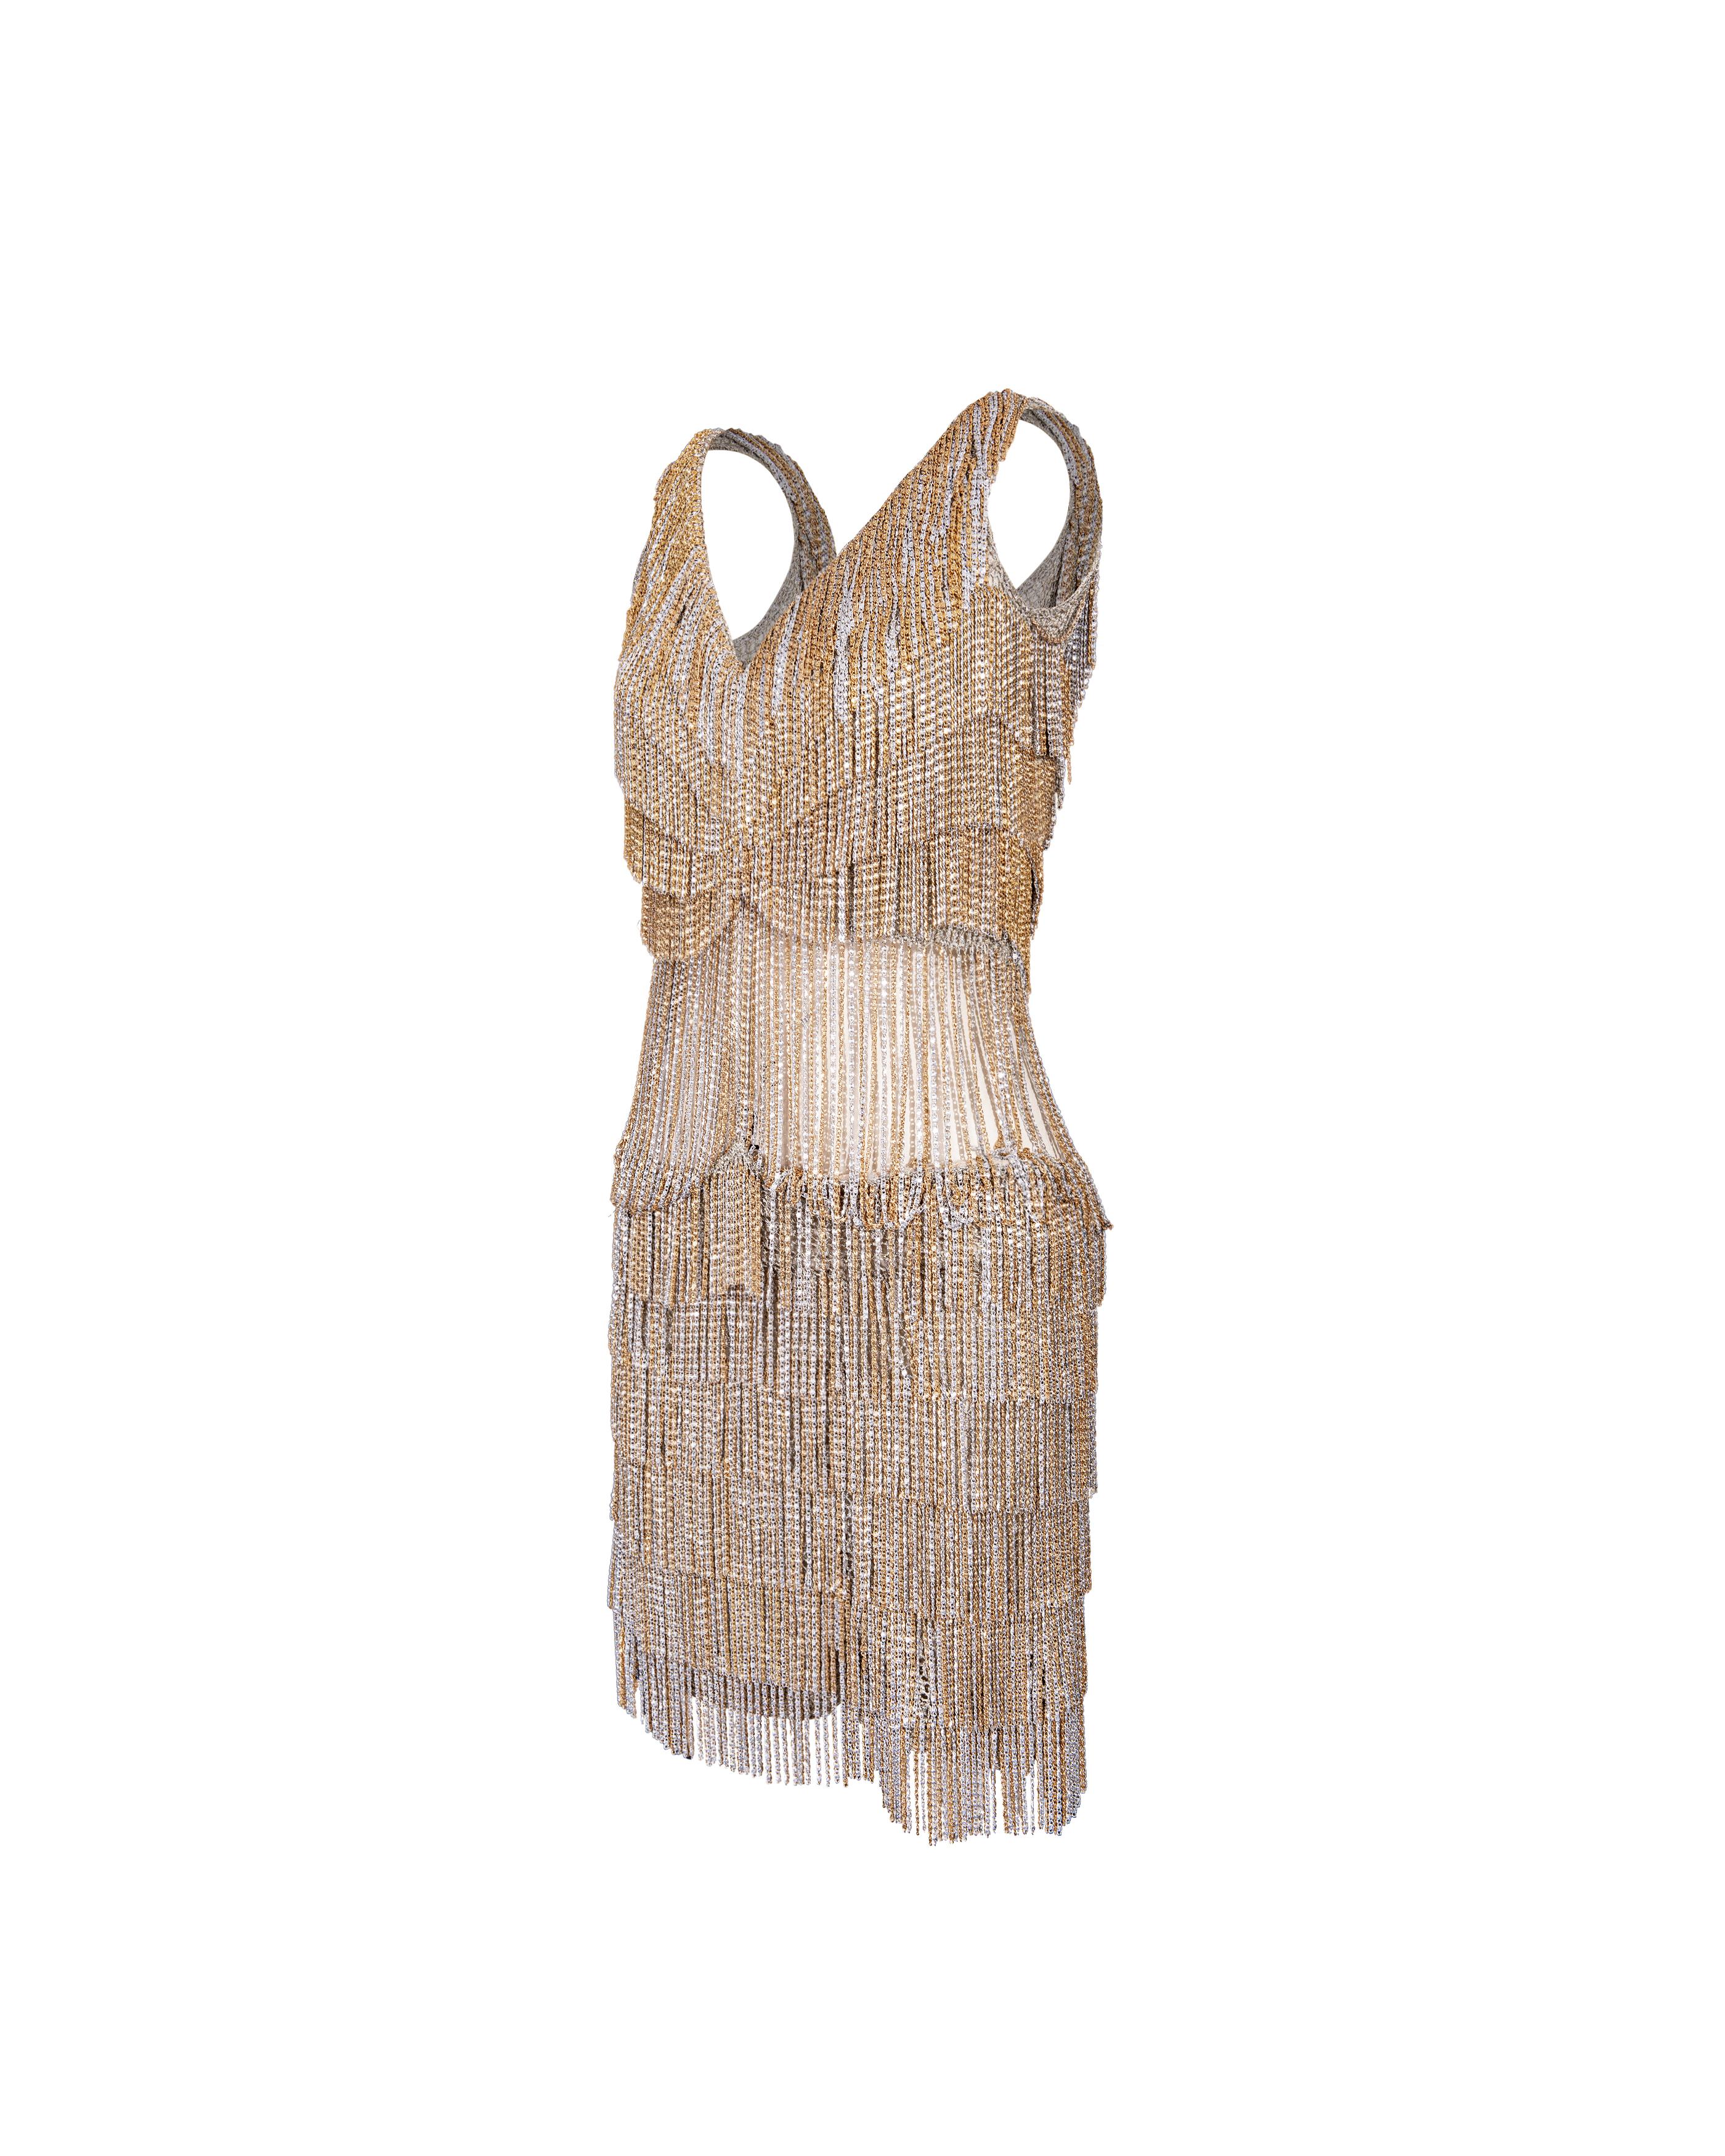 c. 1971 Loris Azzaro Silver and Gold Chain Fringe Mini Dress In Good Condition For Sale In North Hollywood, CA